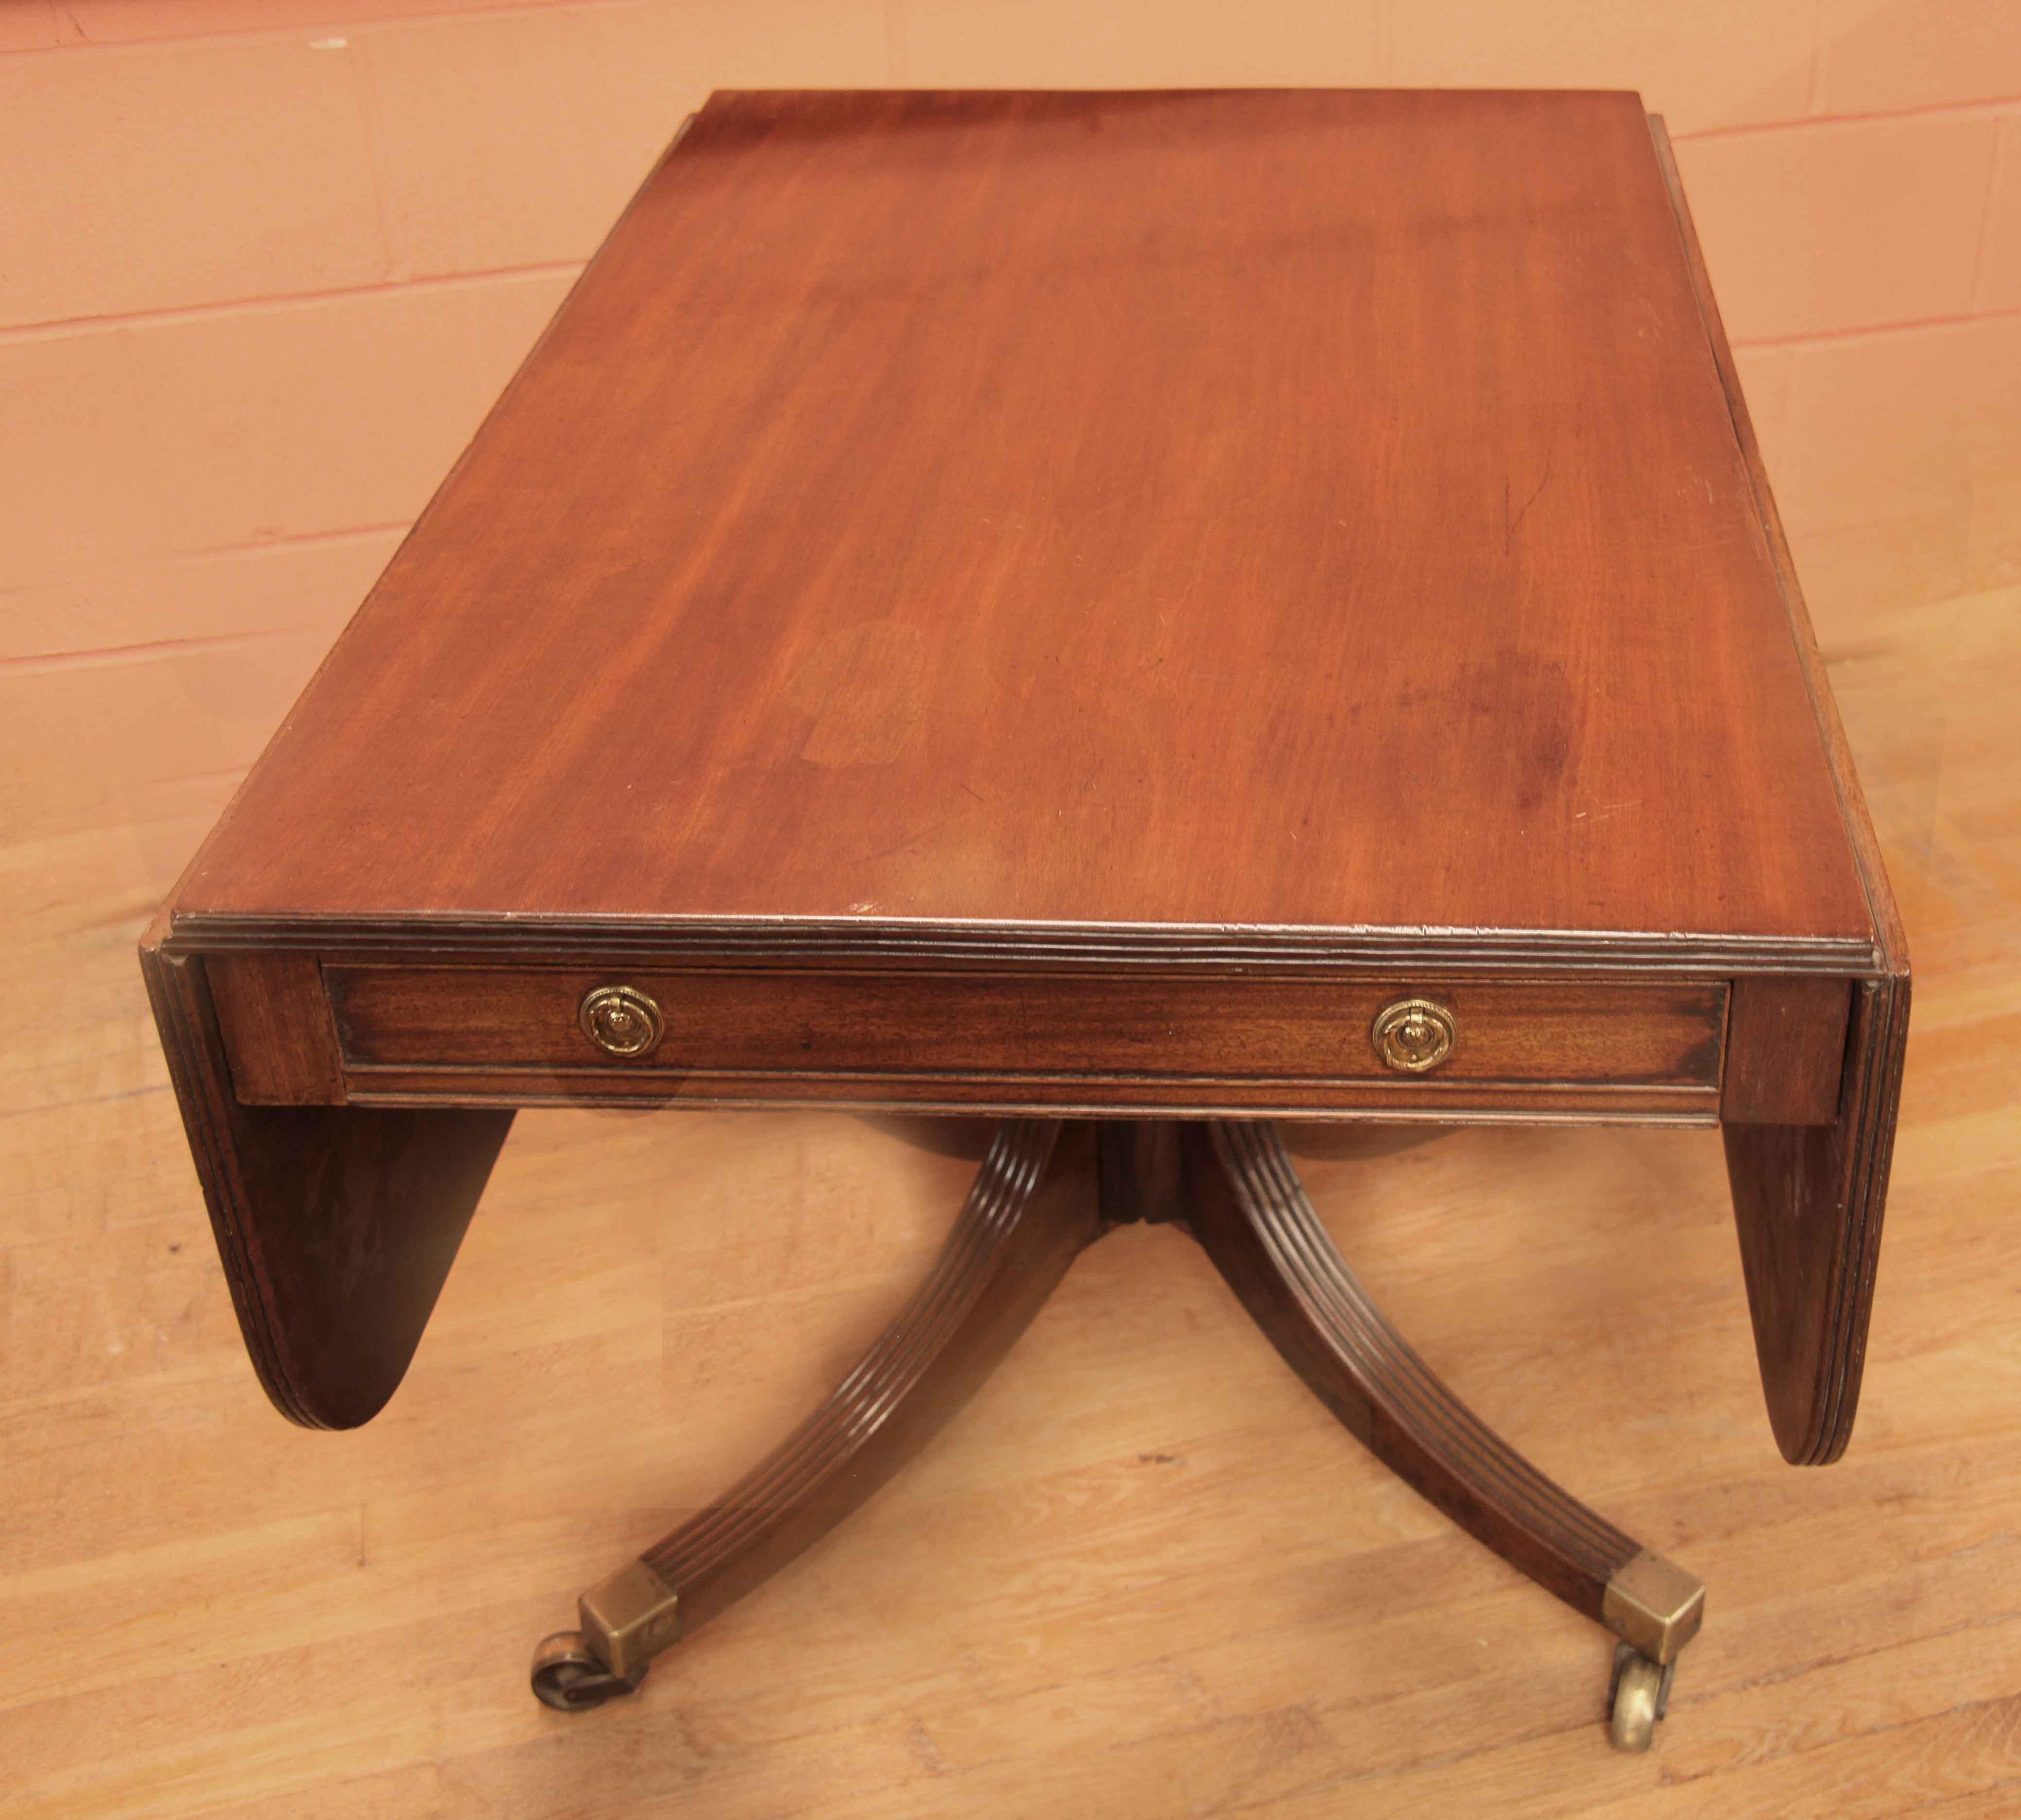 Sheraton drop leaf breakfast table, this mahogany table has beautiful color and antique patina, especially the top and leaves with reeded edges;  the two drop leaves are supported with double butterfly wings( see photo). There are identical drawers